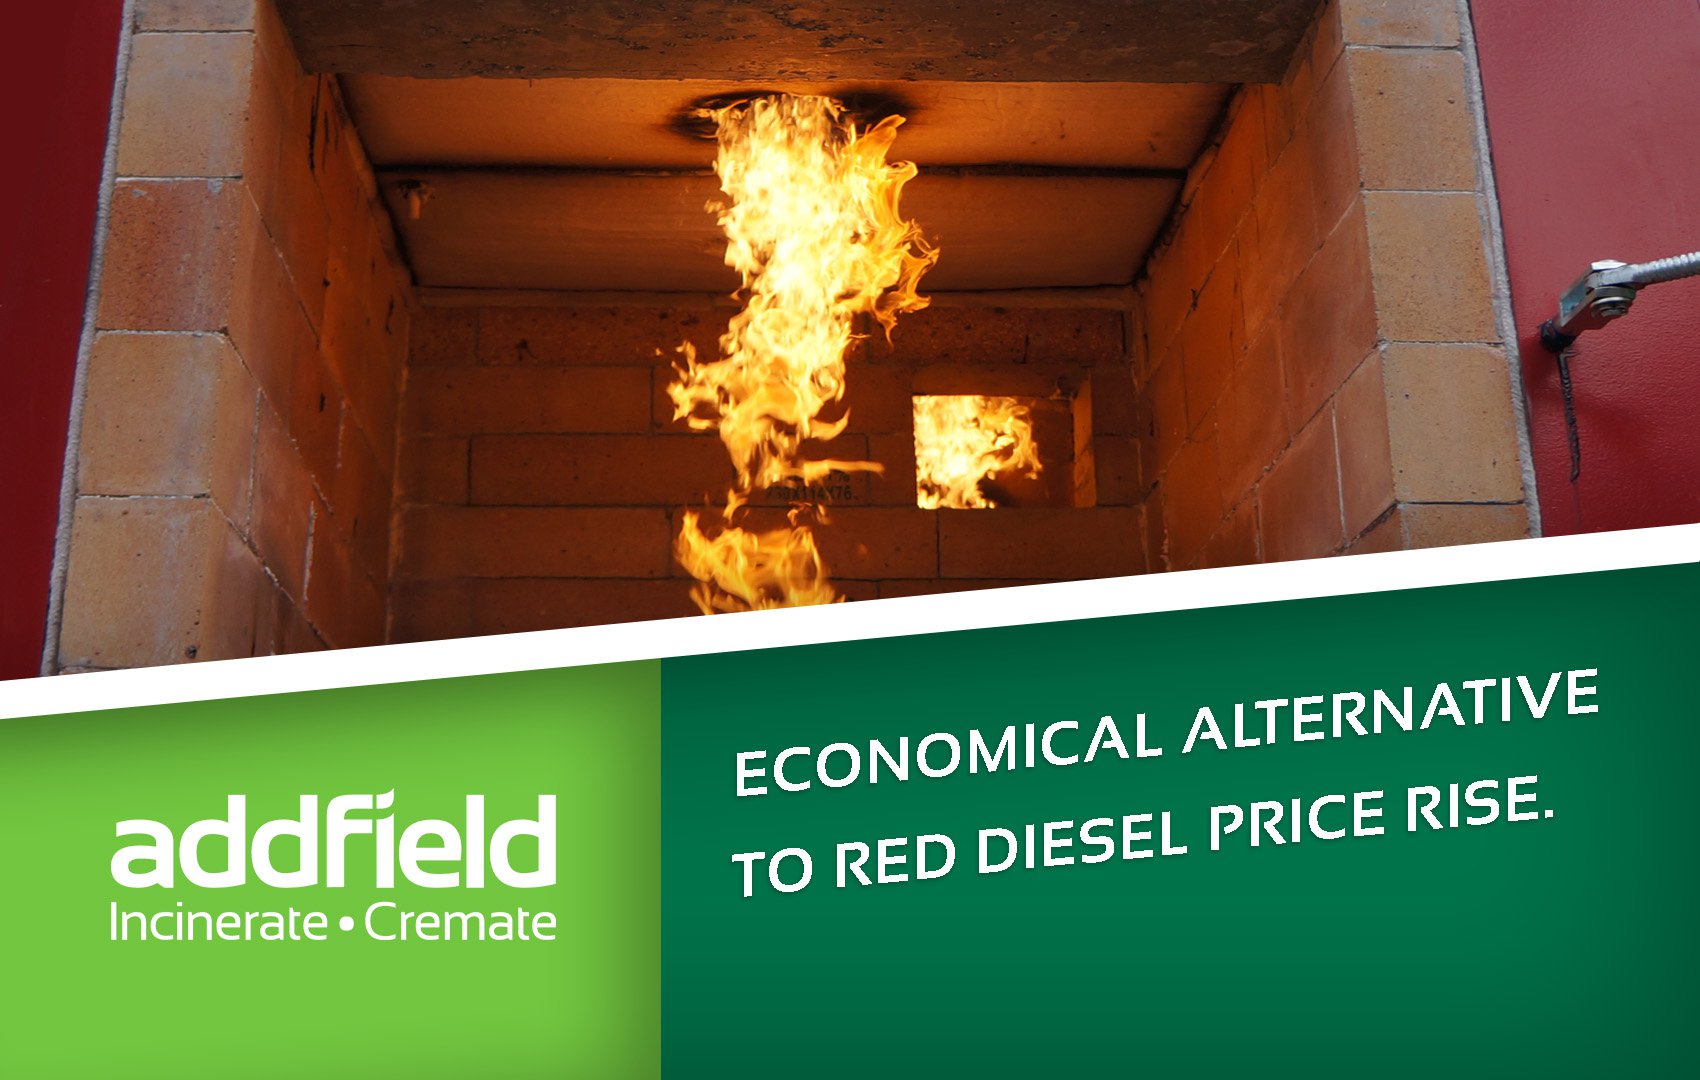 Alternative fuels help stop users seeing Red